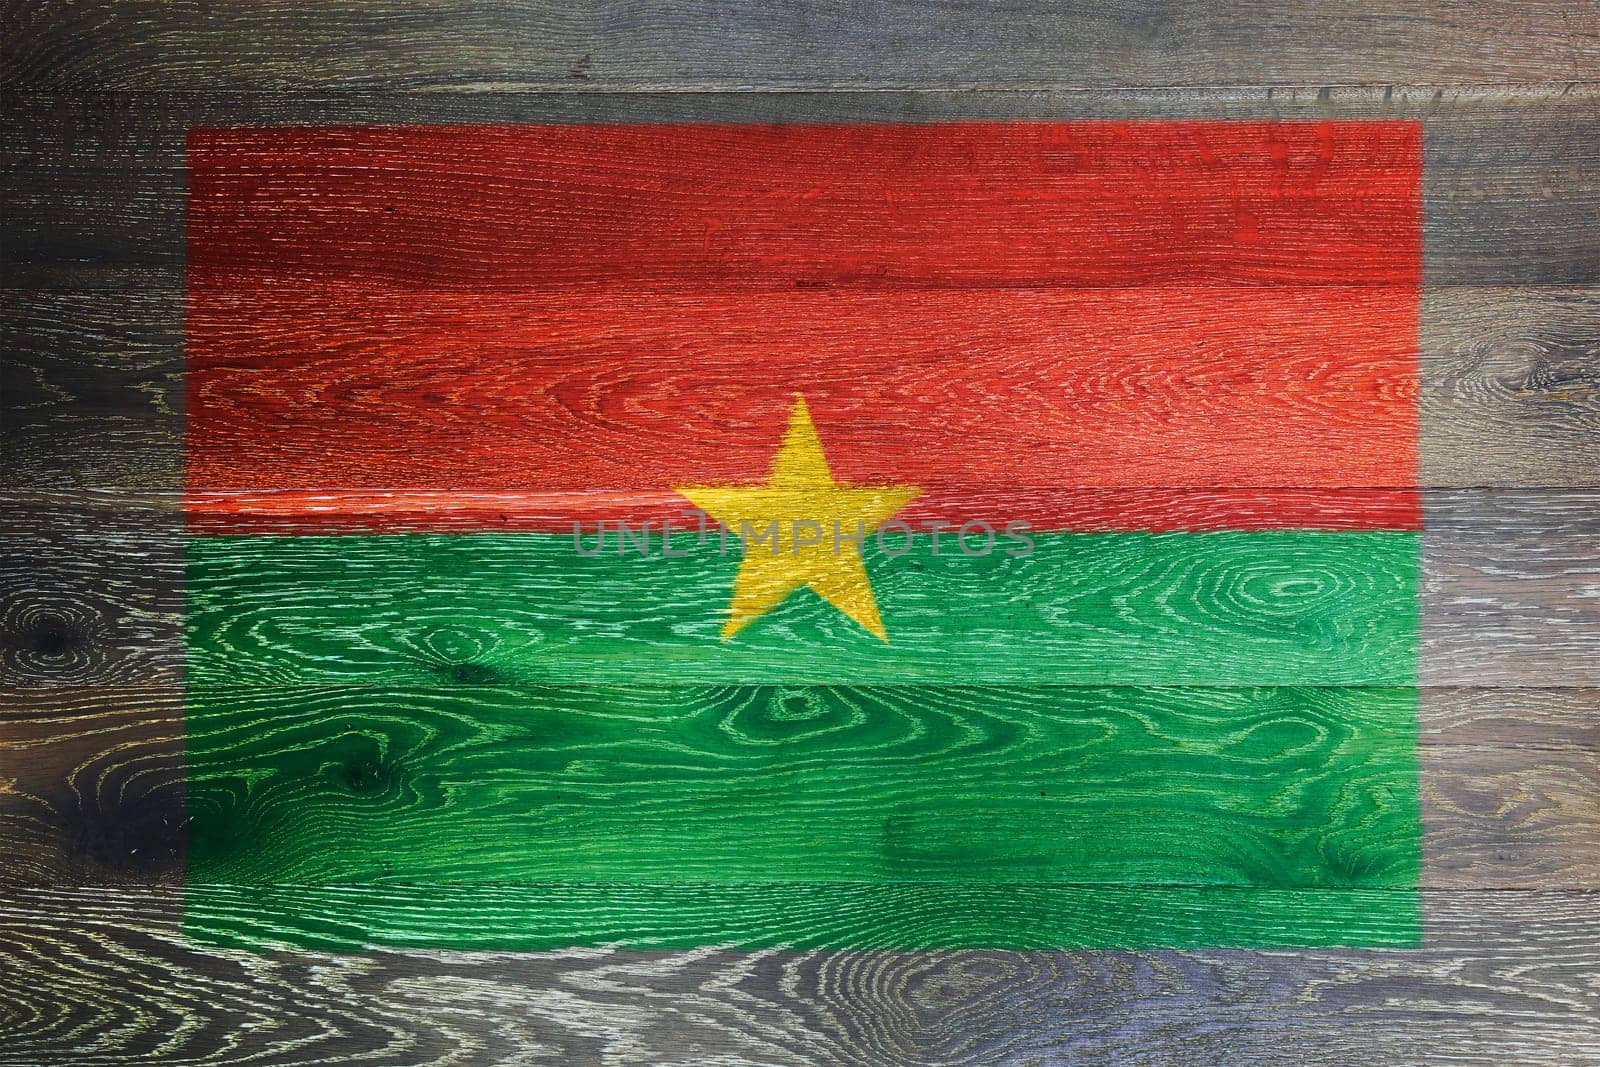 A Burkina flag on rustic old wood surface background